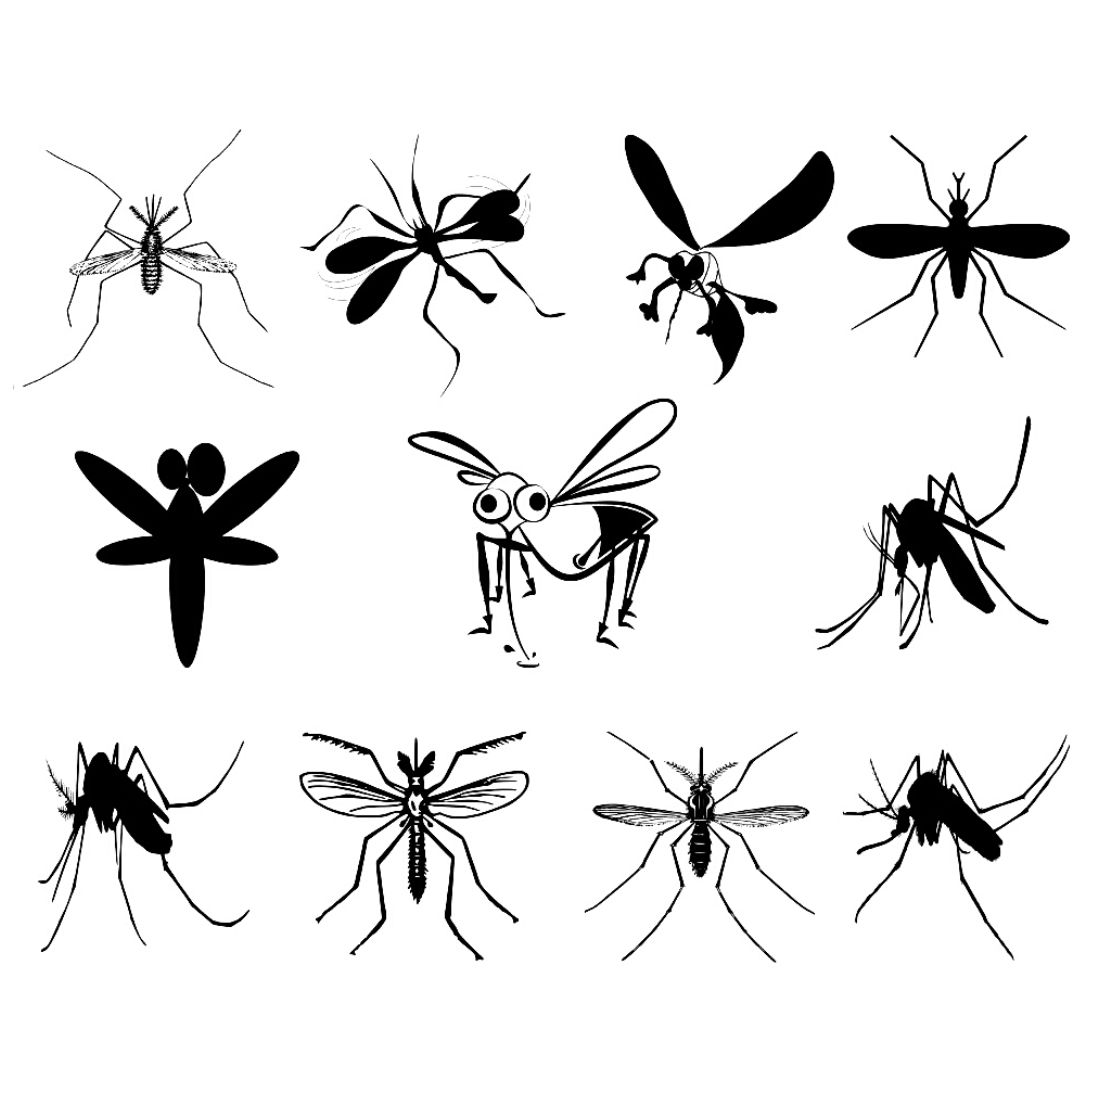 Mosquito Silhouette Bundle cover image.